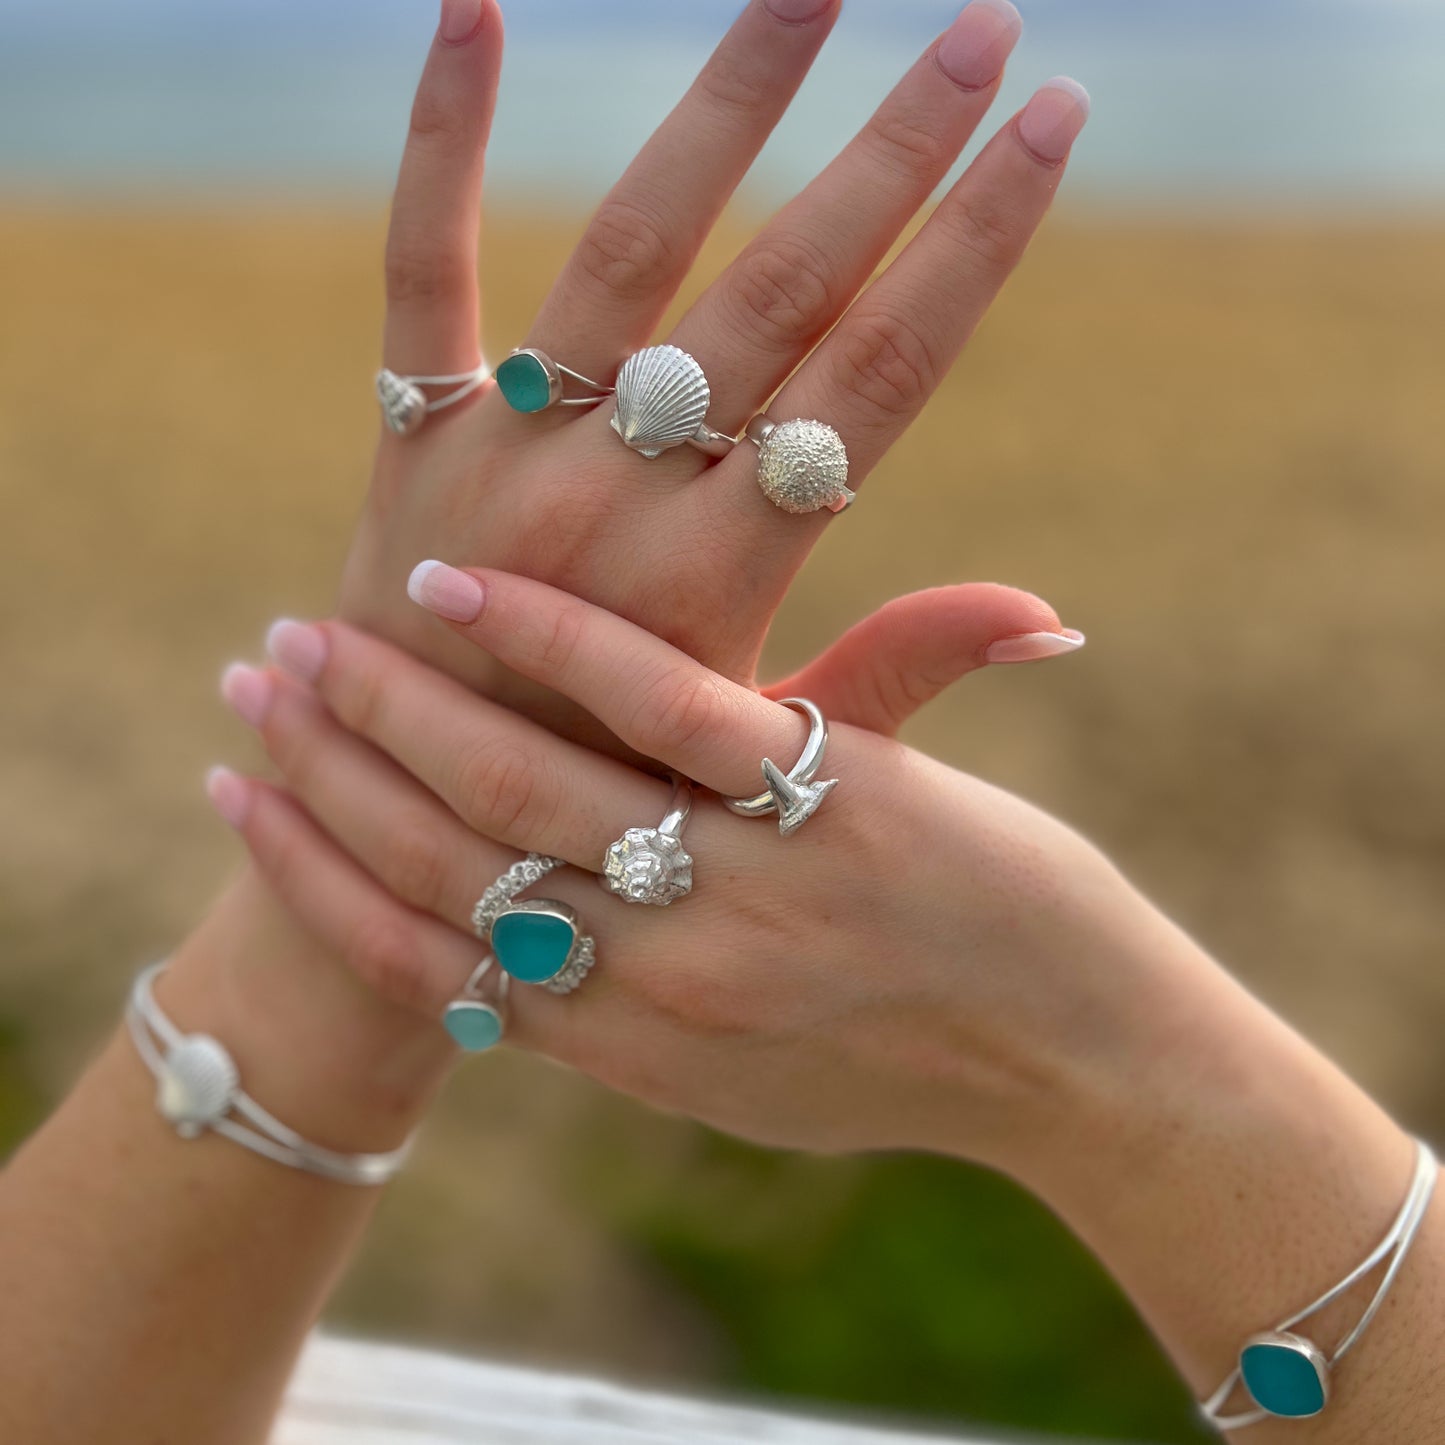 Assorted silver and sea glass rings and bangles by Mornington Sea Glass. Features cast shells, shark teeth and octopus tentacle.